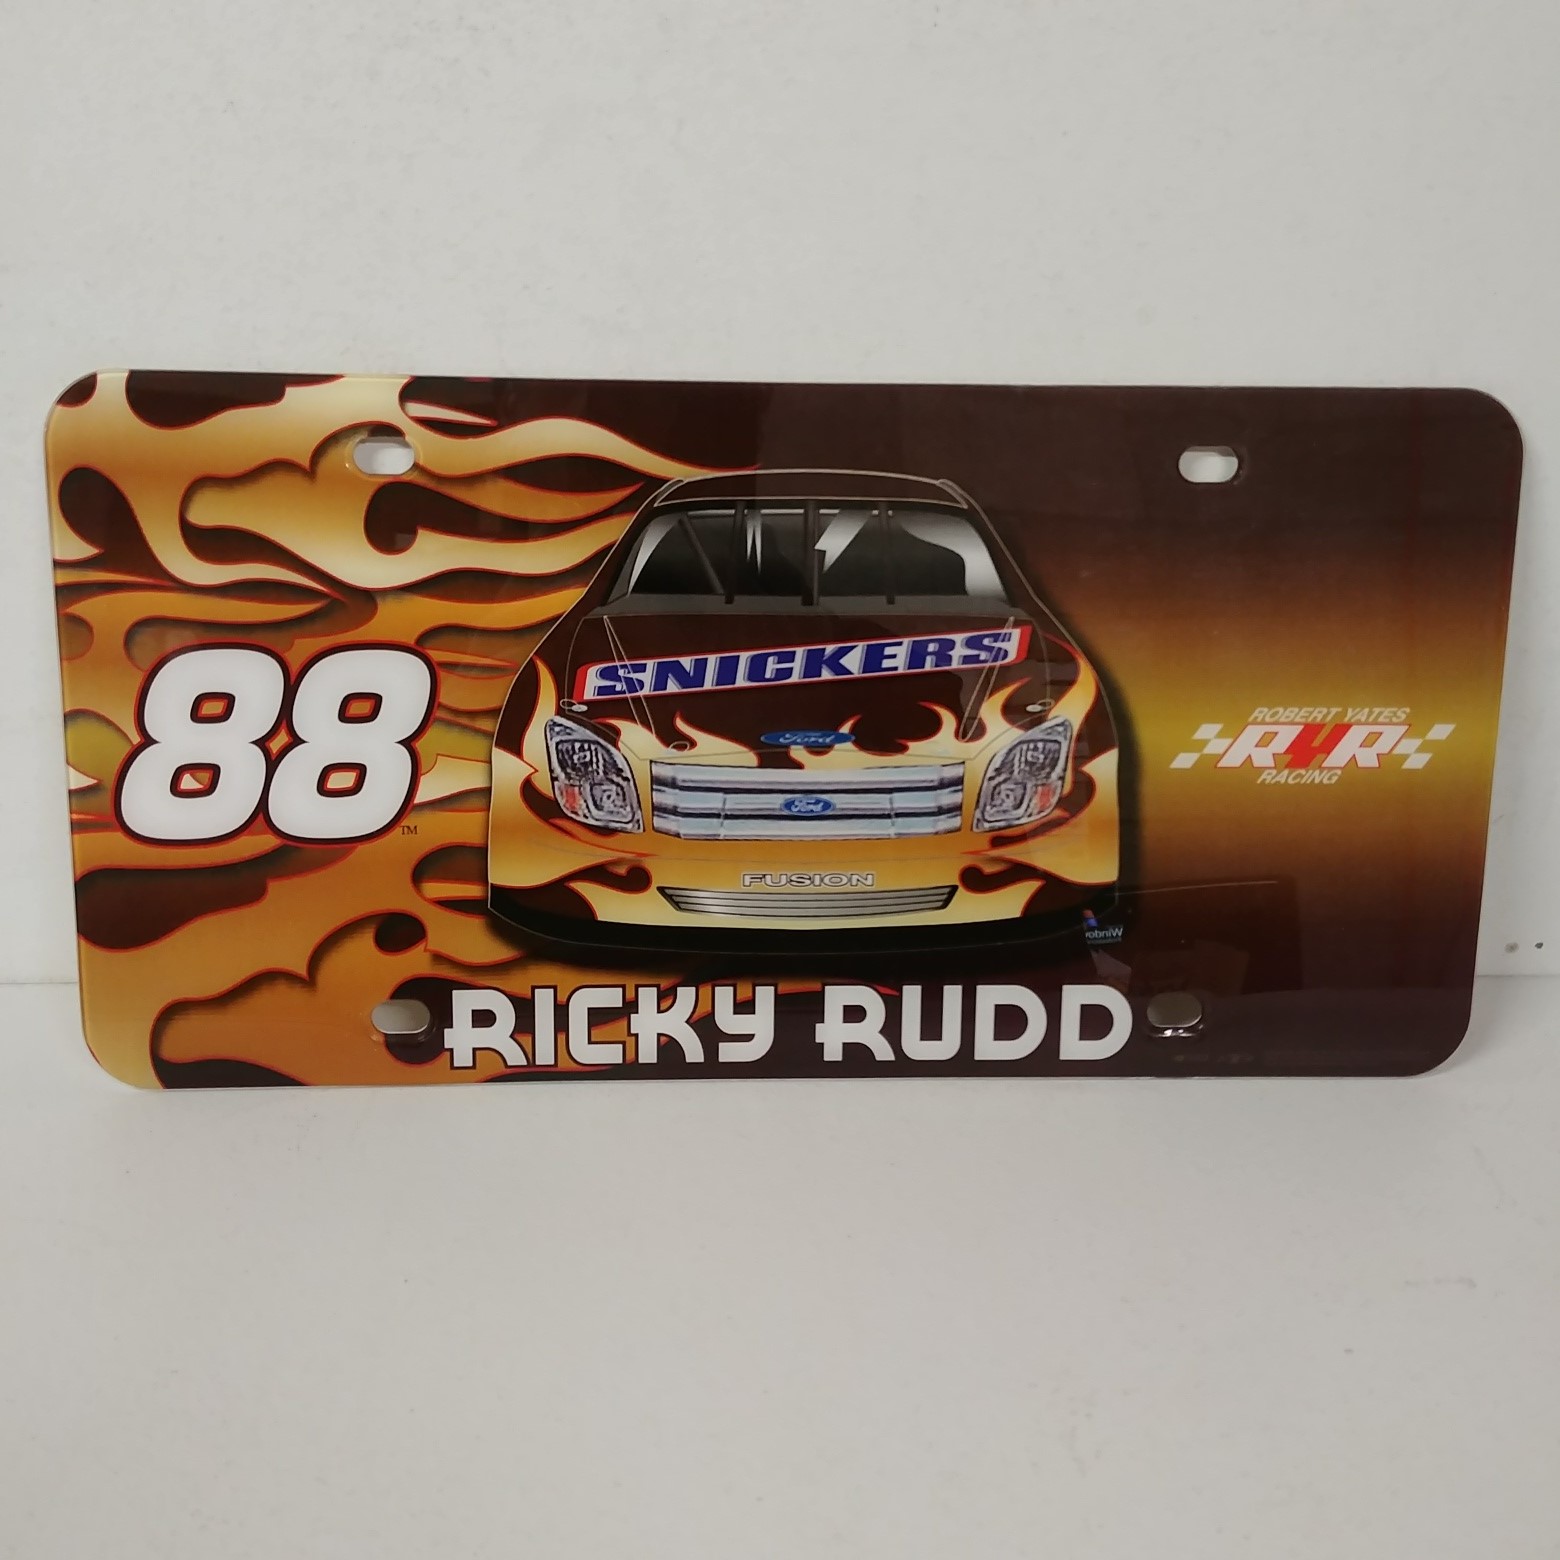 2007 Ricky Rudd Snickers plastic license plate